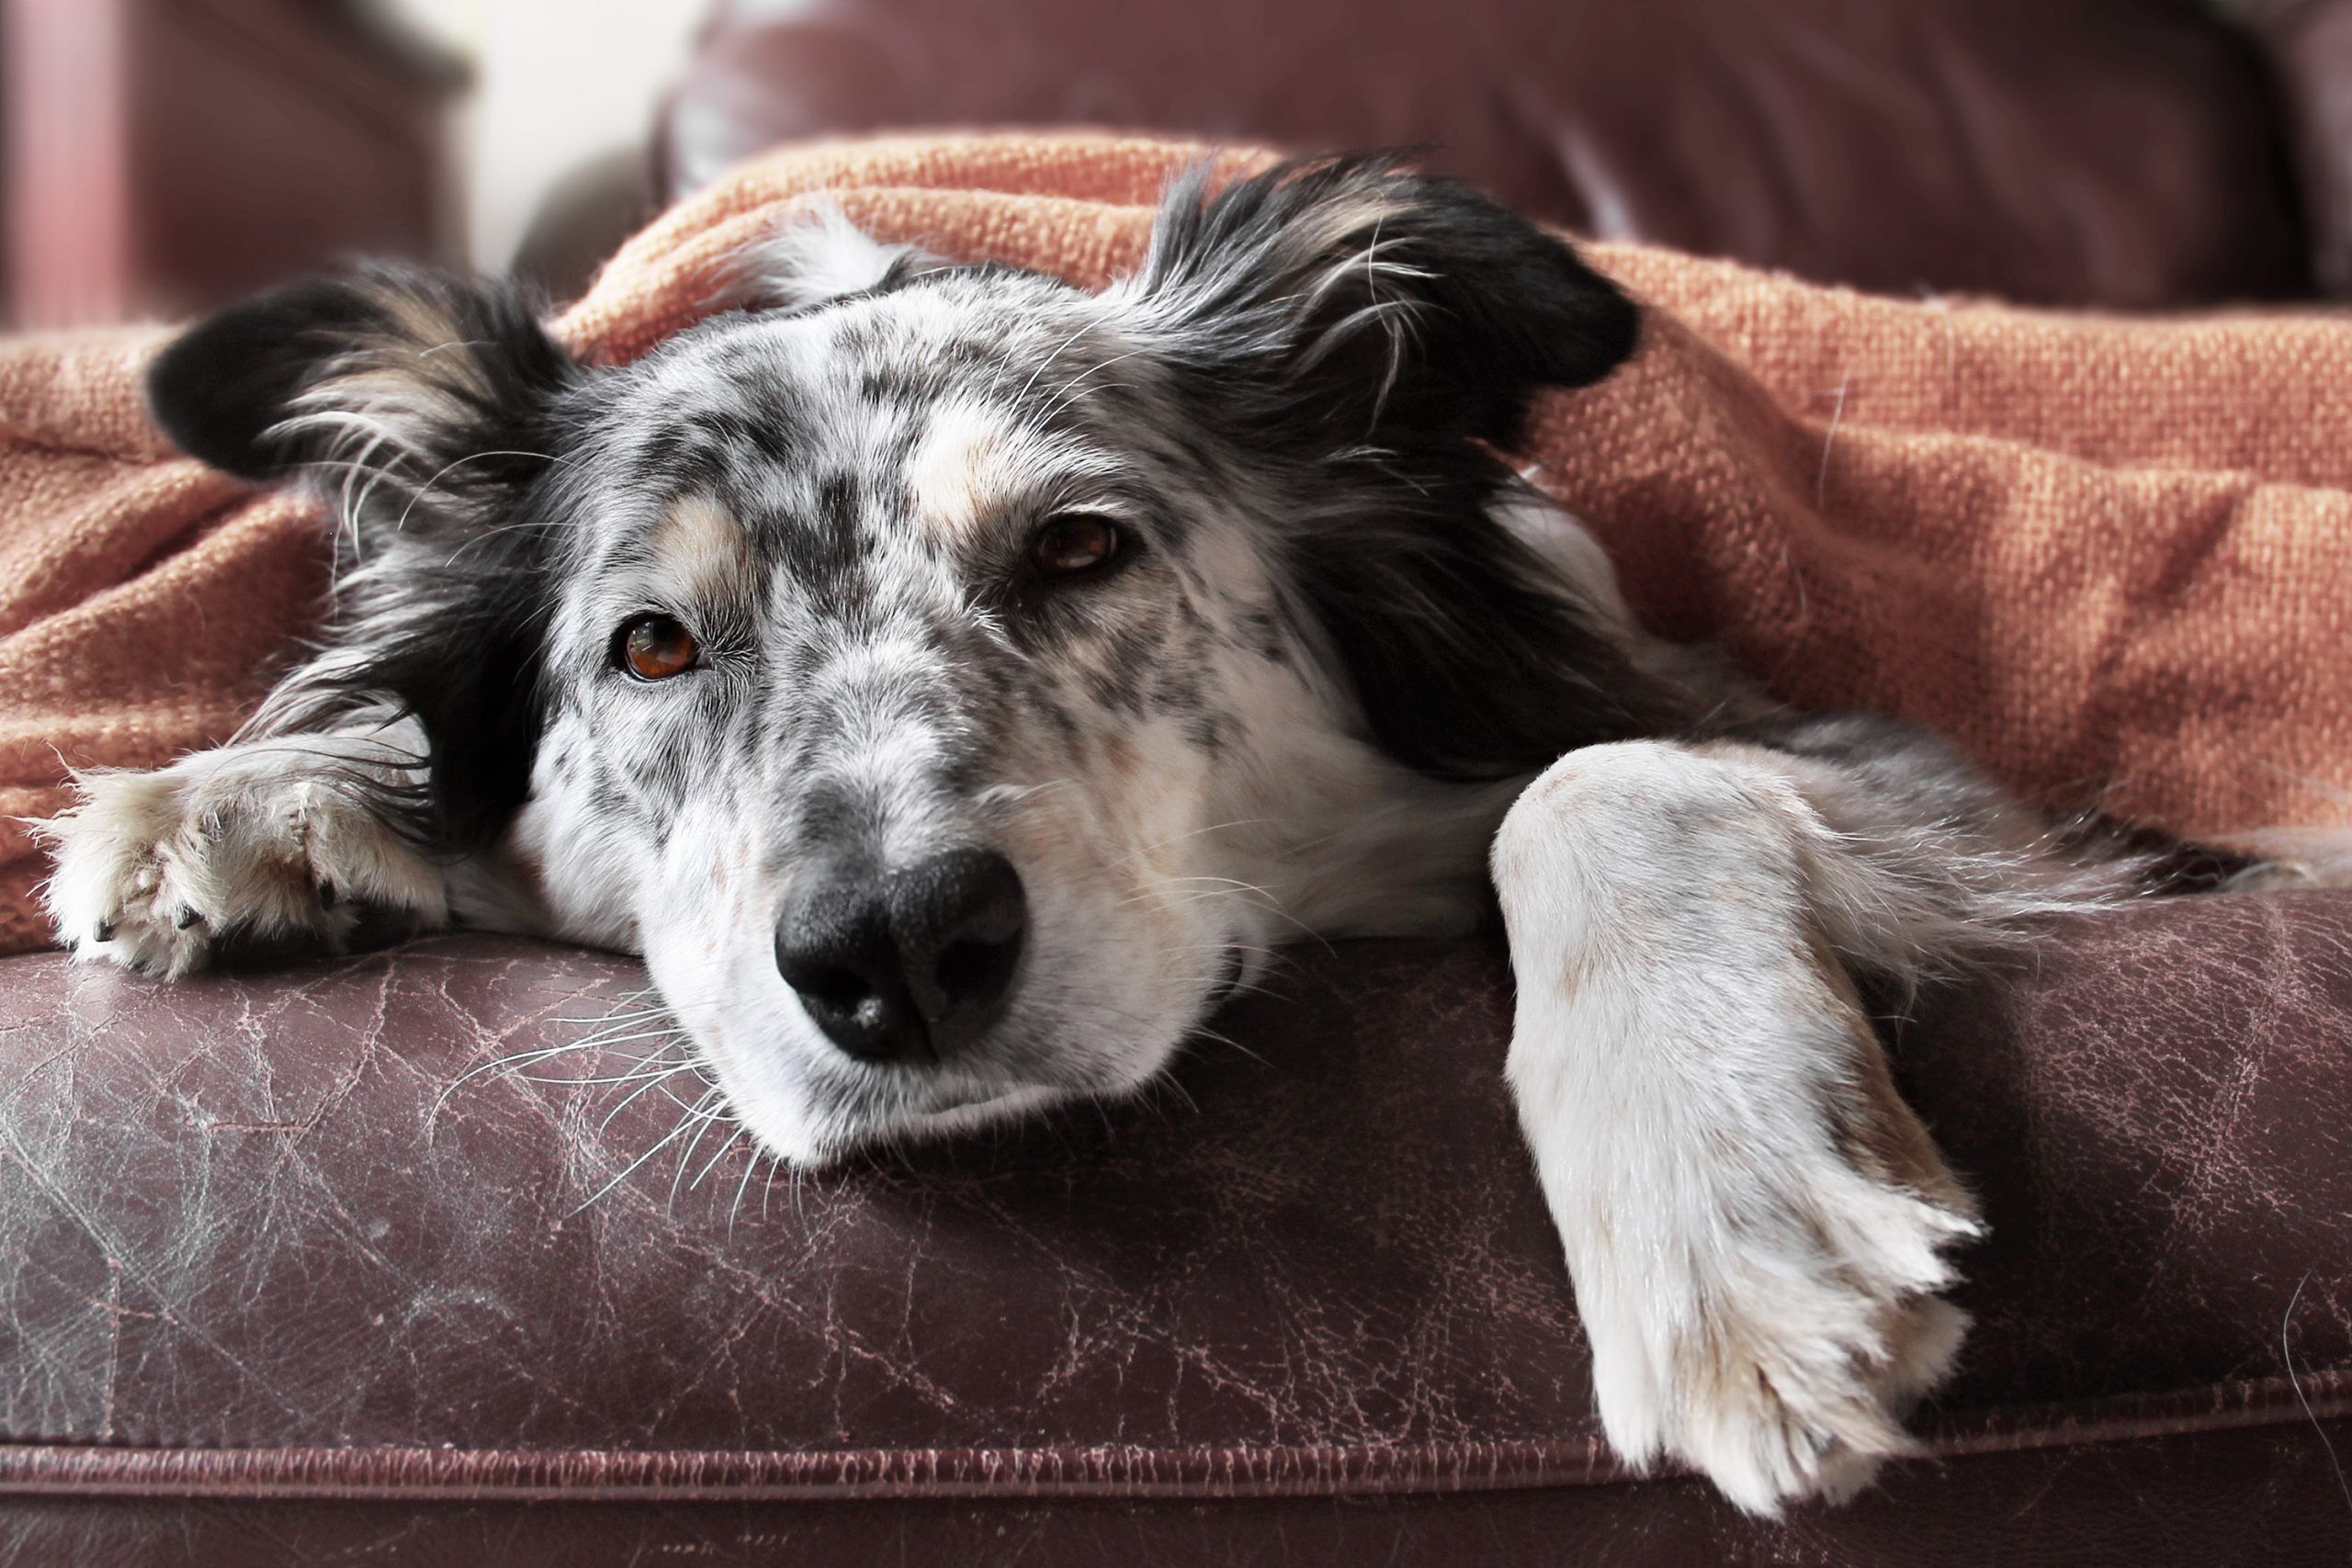 Cancer in dogs. Sick black and white border collie dog laying on leather couch